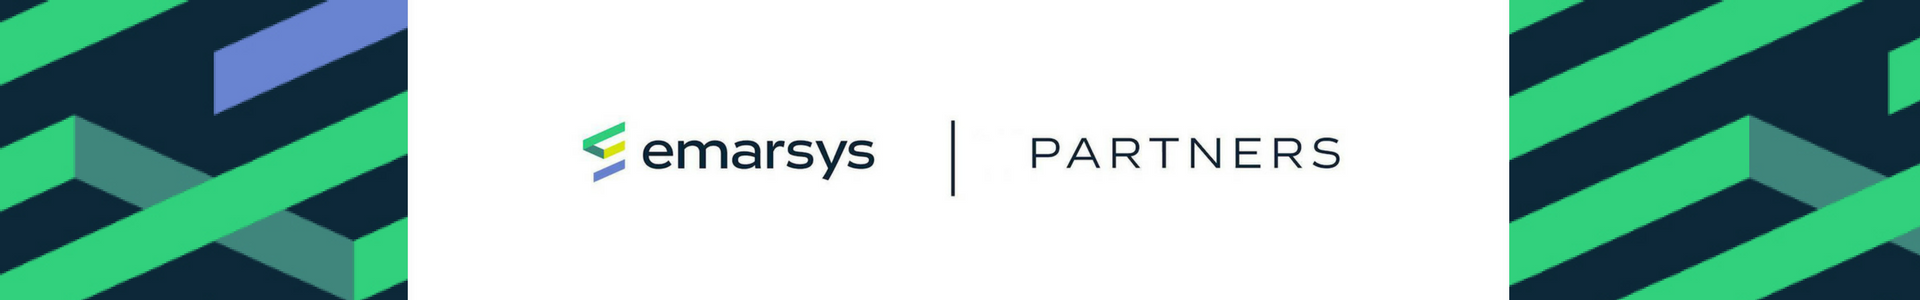 QIVOS partners with Emarsys marketing automation leader